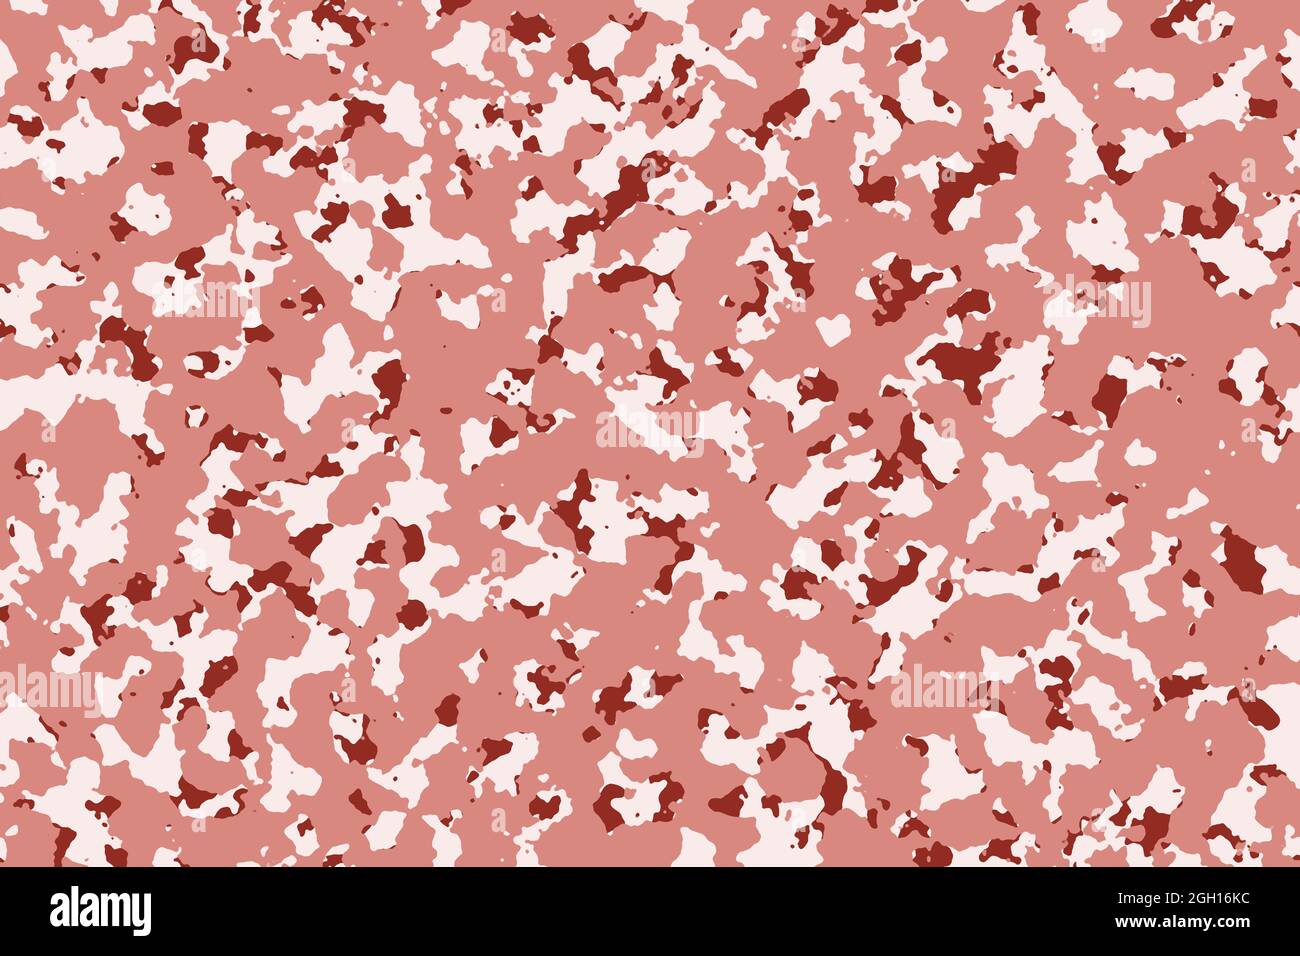 Different shades of red camouflage pattern Stock Photo